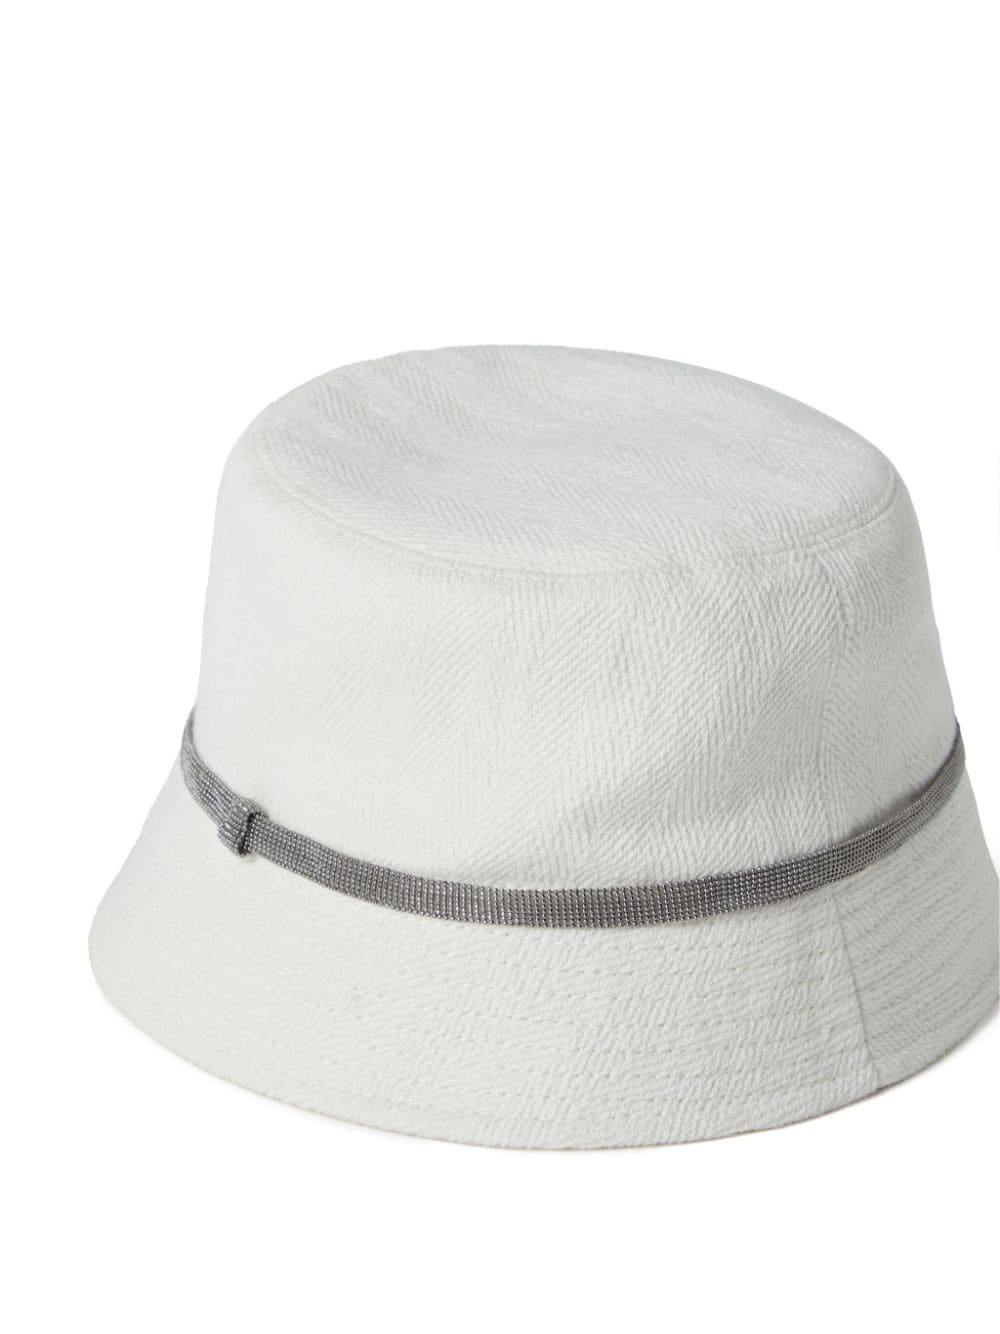 Linen and cotton bucket hat with shiny details - 2